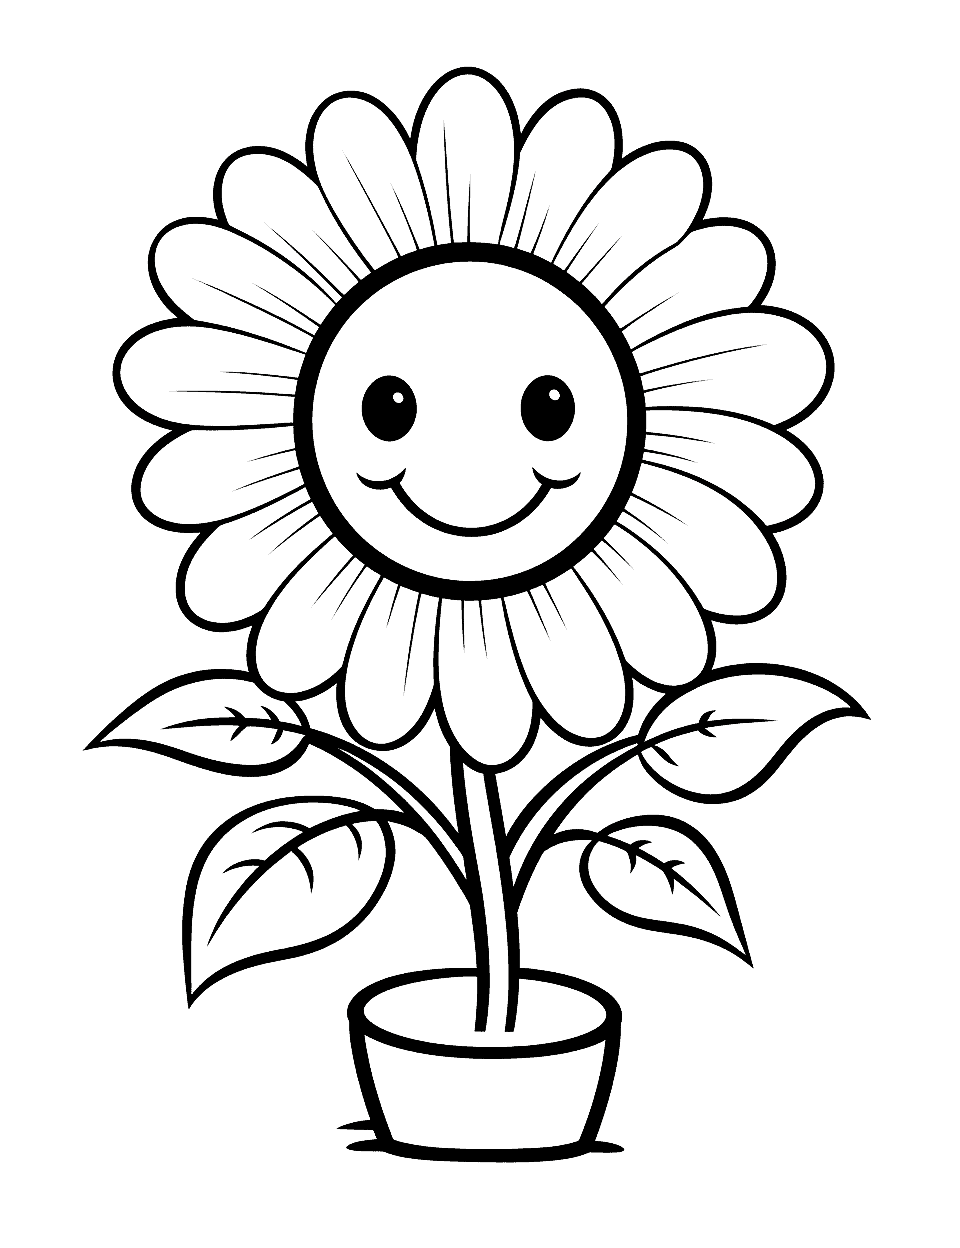 Cool and Cute Sunflower Flower Coloring Page - A cool sunflower with a cute smiley face in the center.